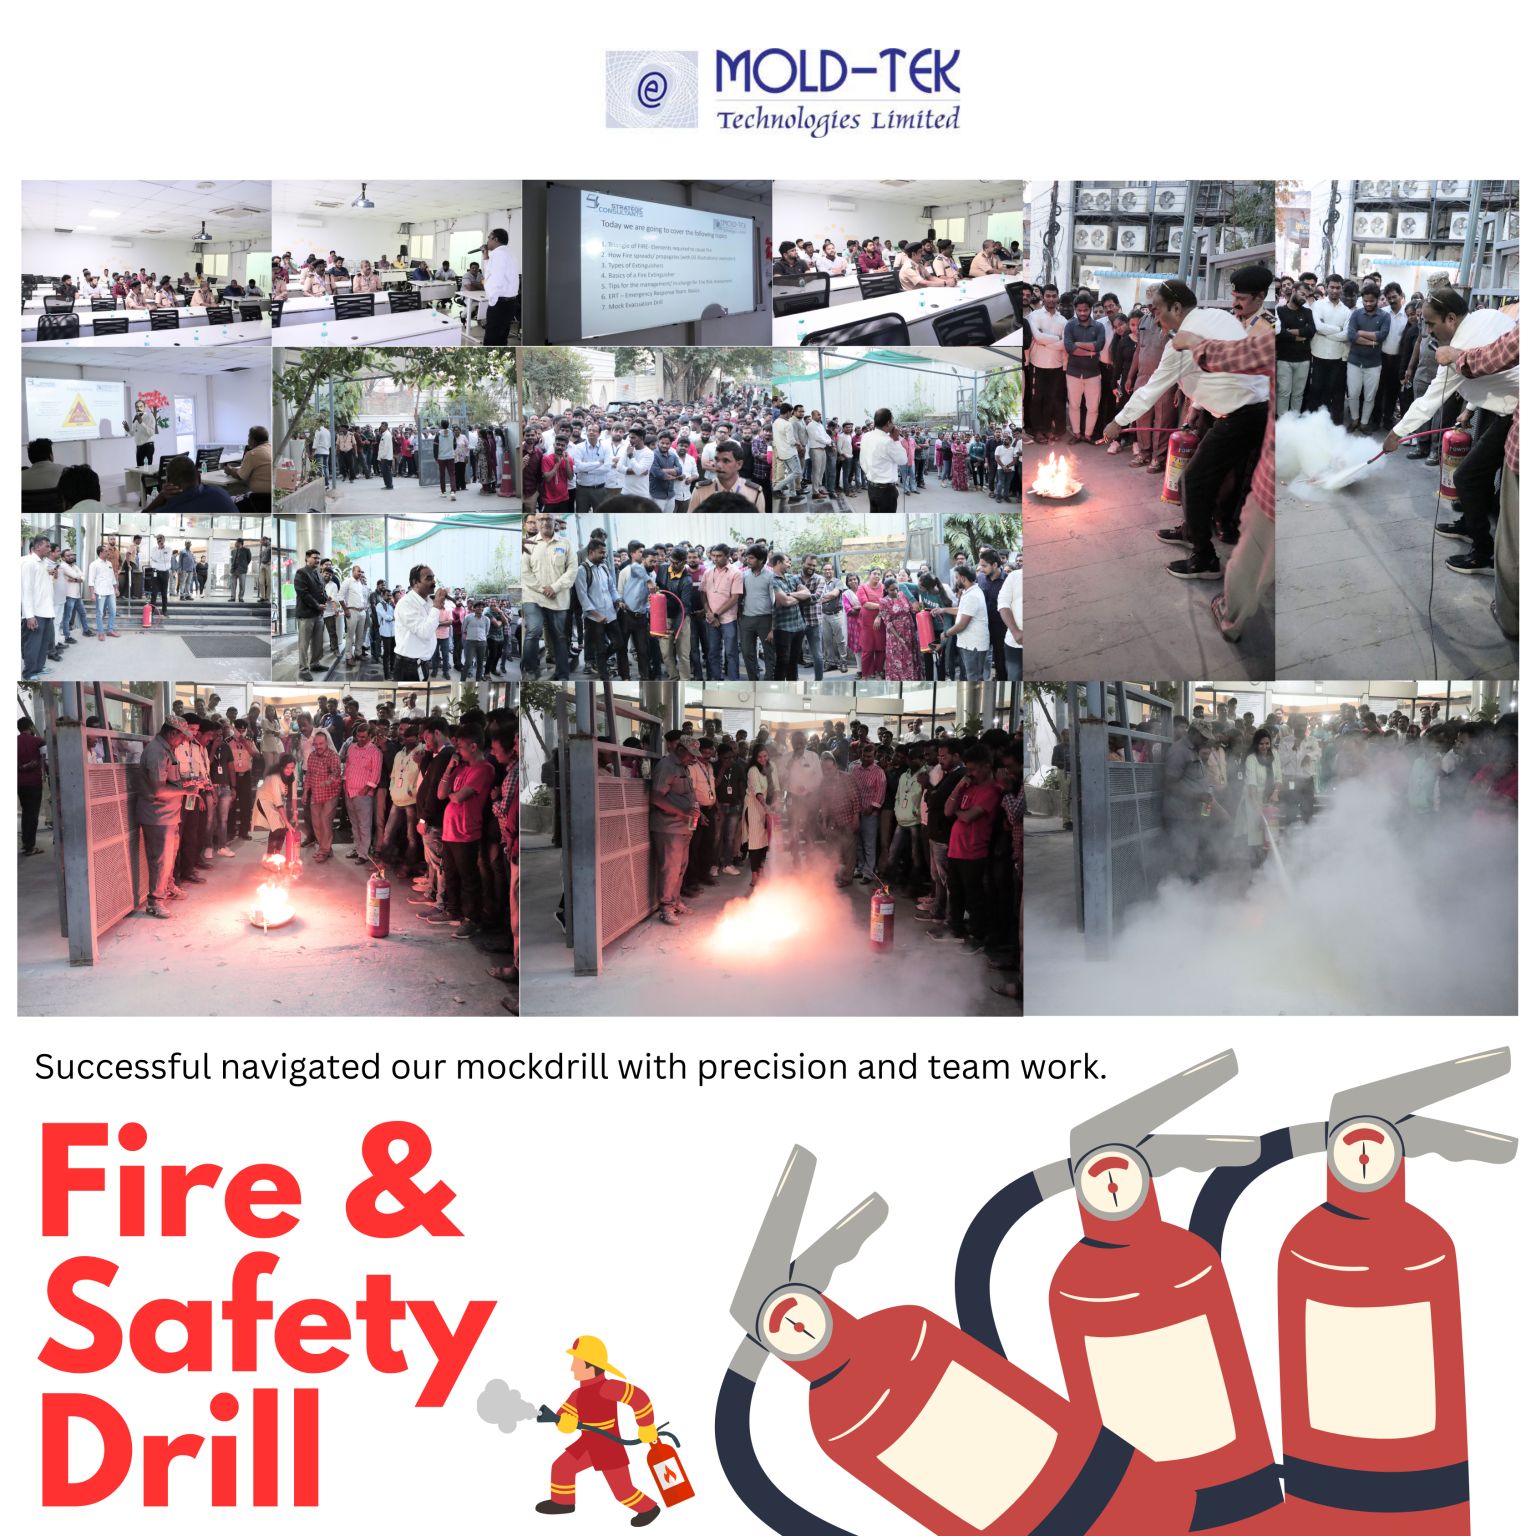 Fire and safety drill